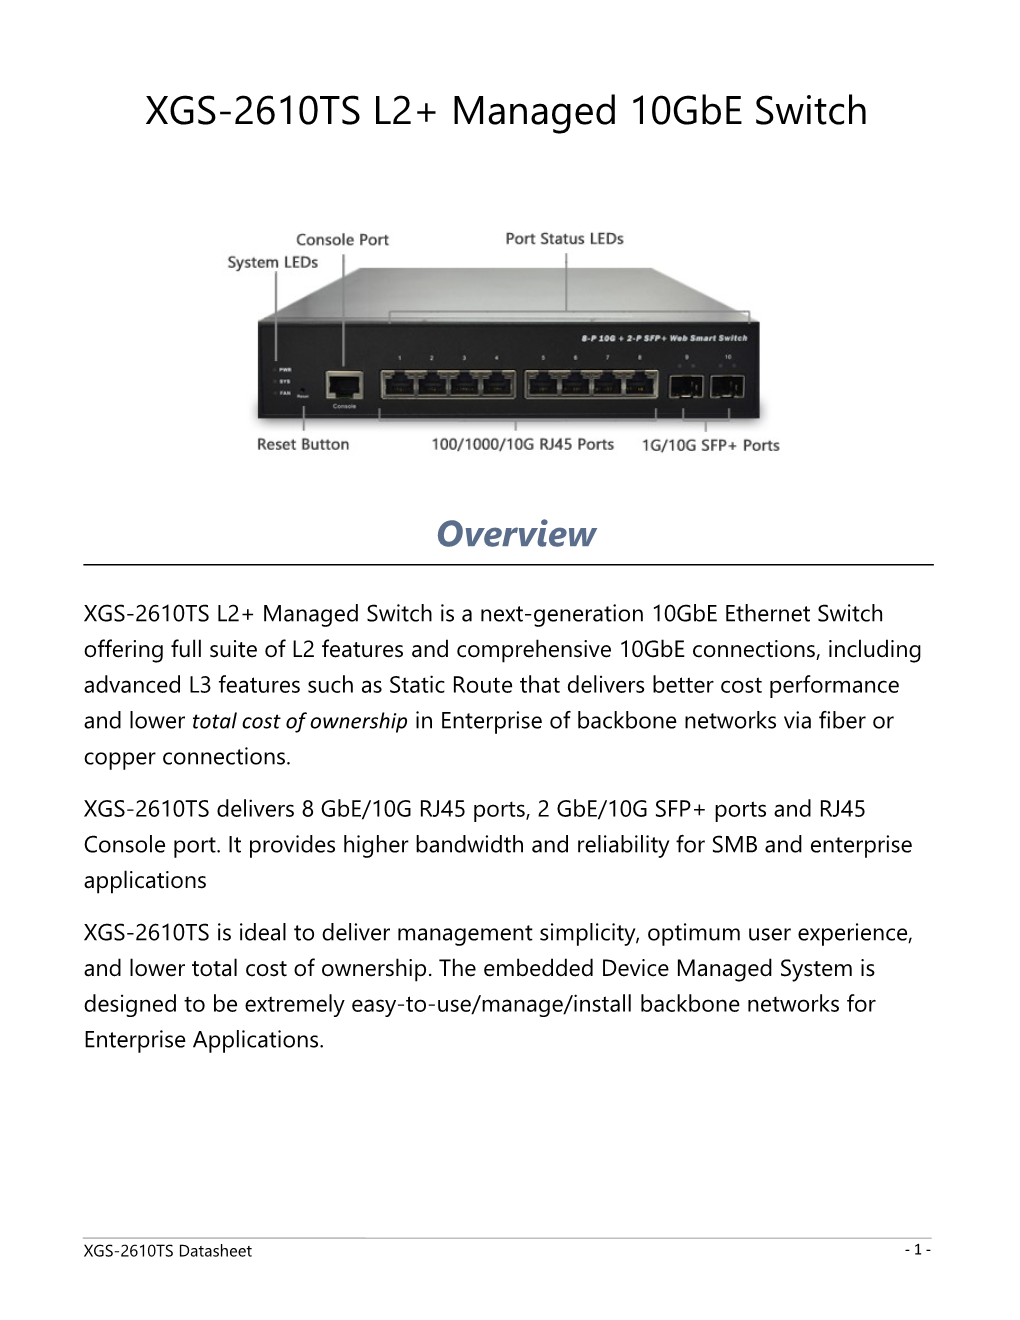 XGS-2610TS L2+ Managed 10Gbe Switch